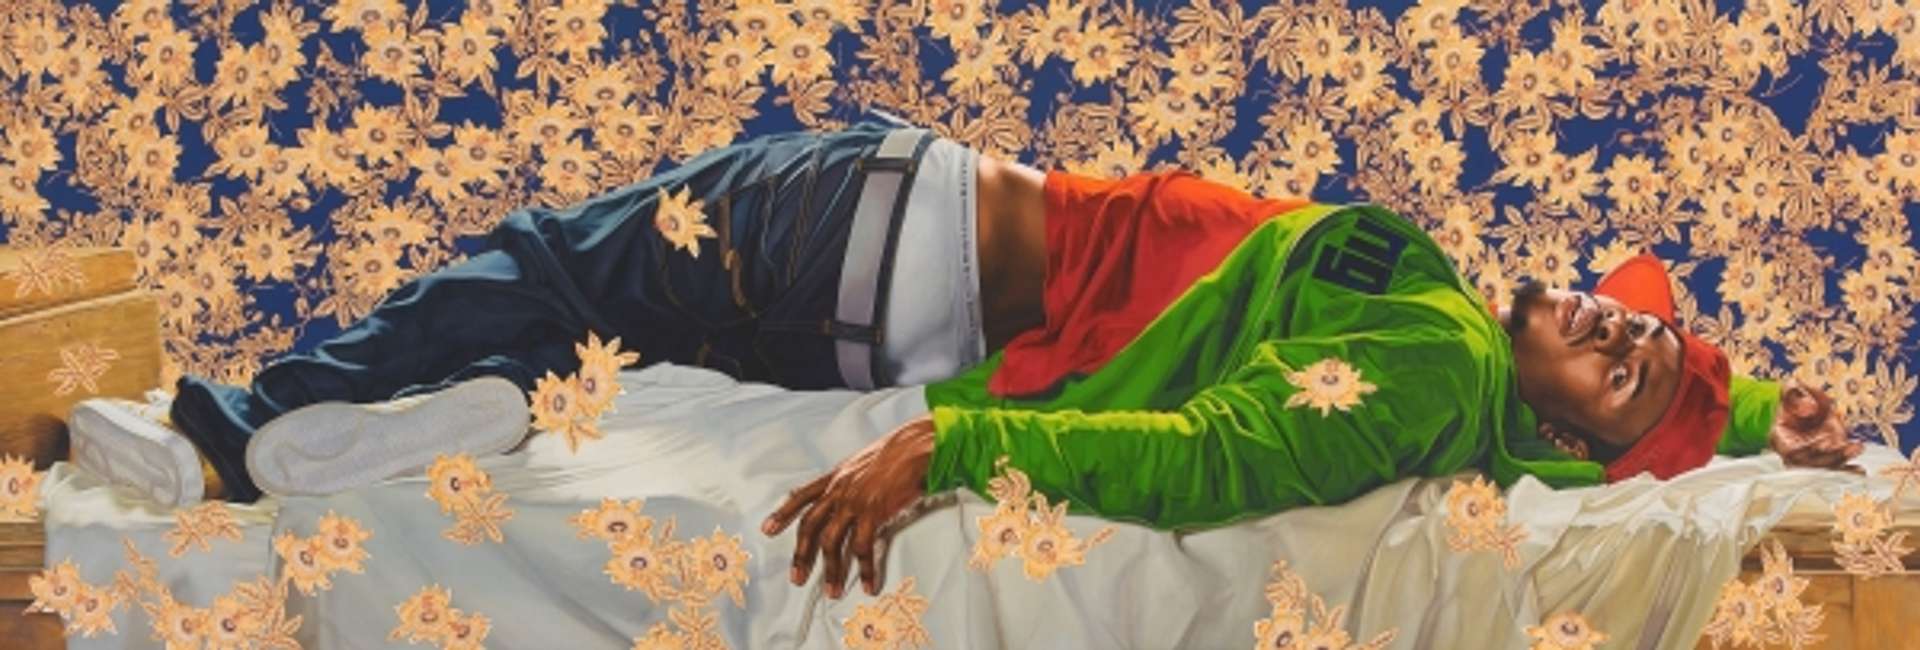 Kehinde Wiley’s Femme Piquée Par Un Serpent. A man laying down in a bed surrounded by flowers dressed in streetwear.